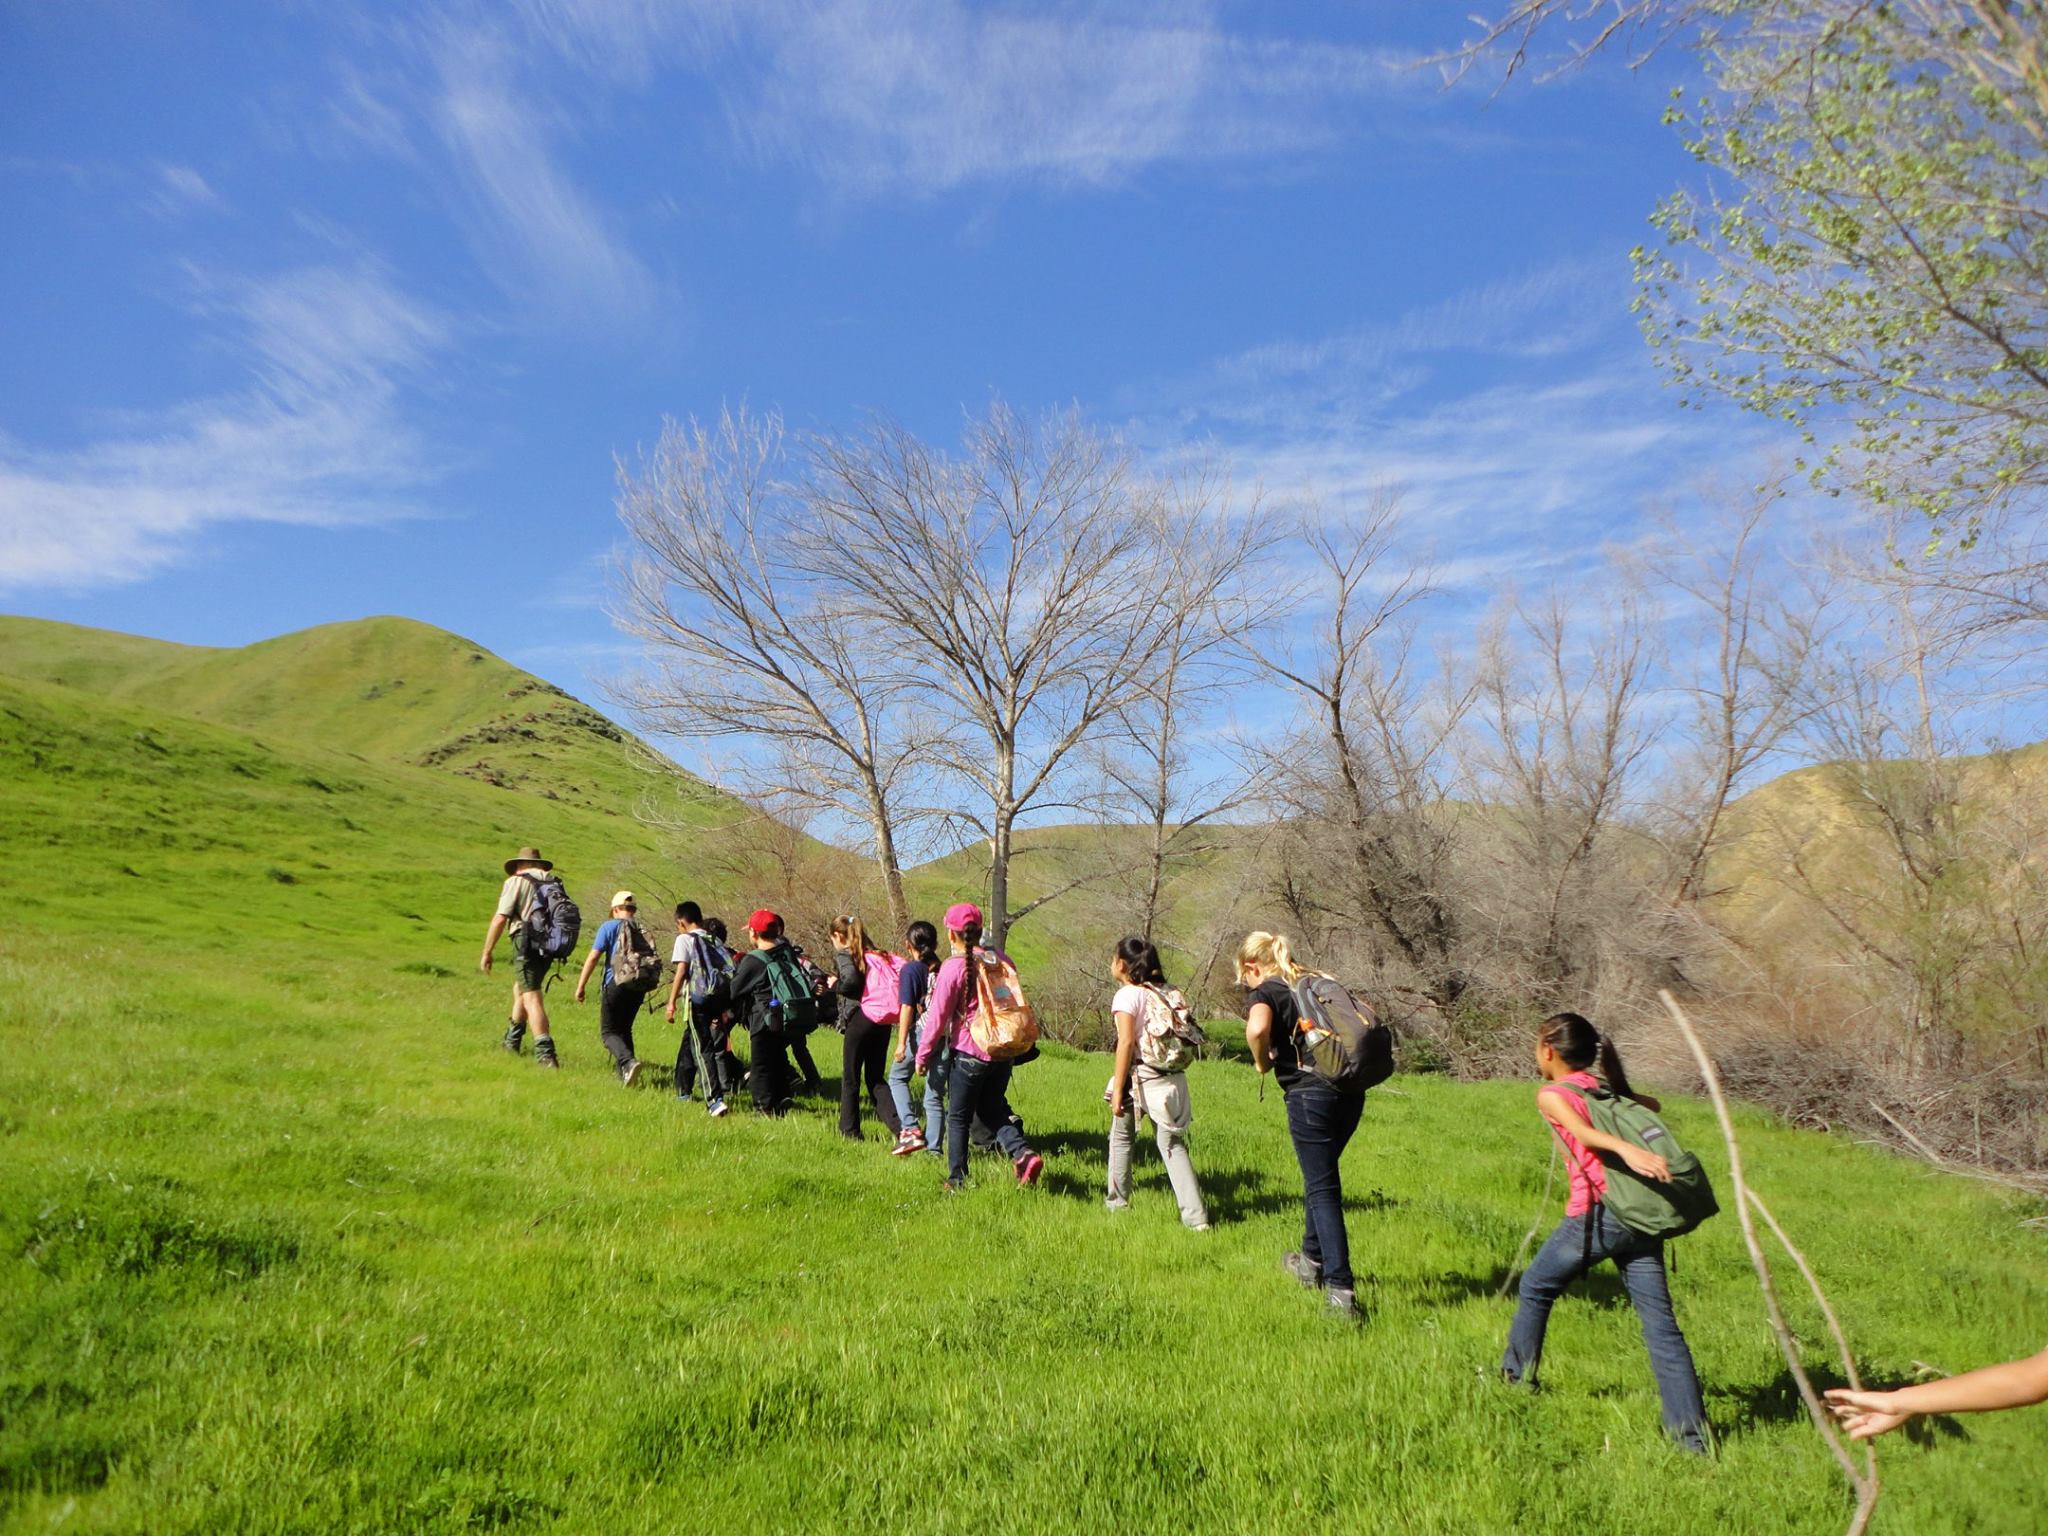 Hiking at Pacheco State Park